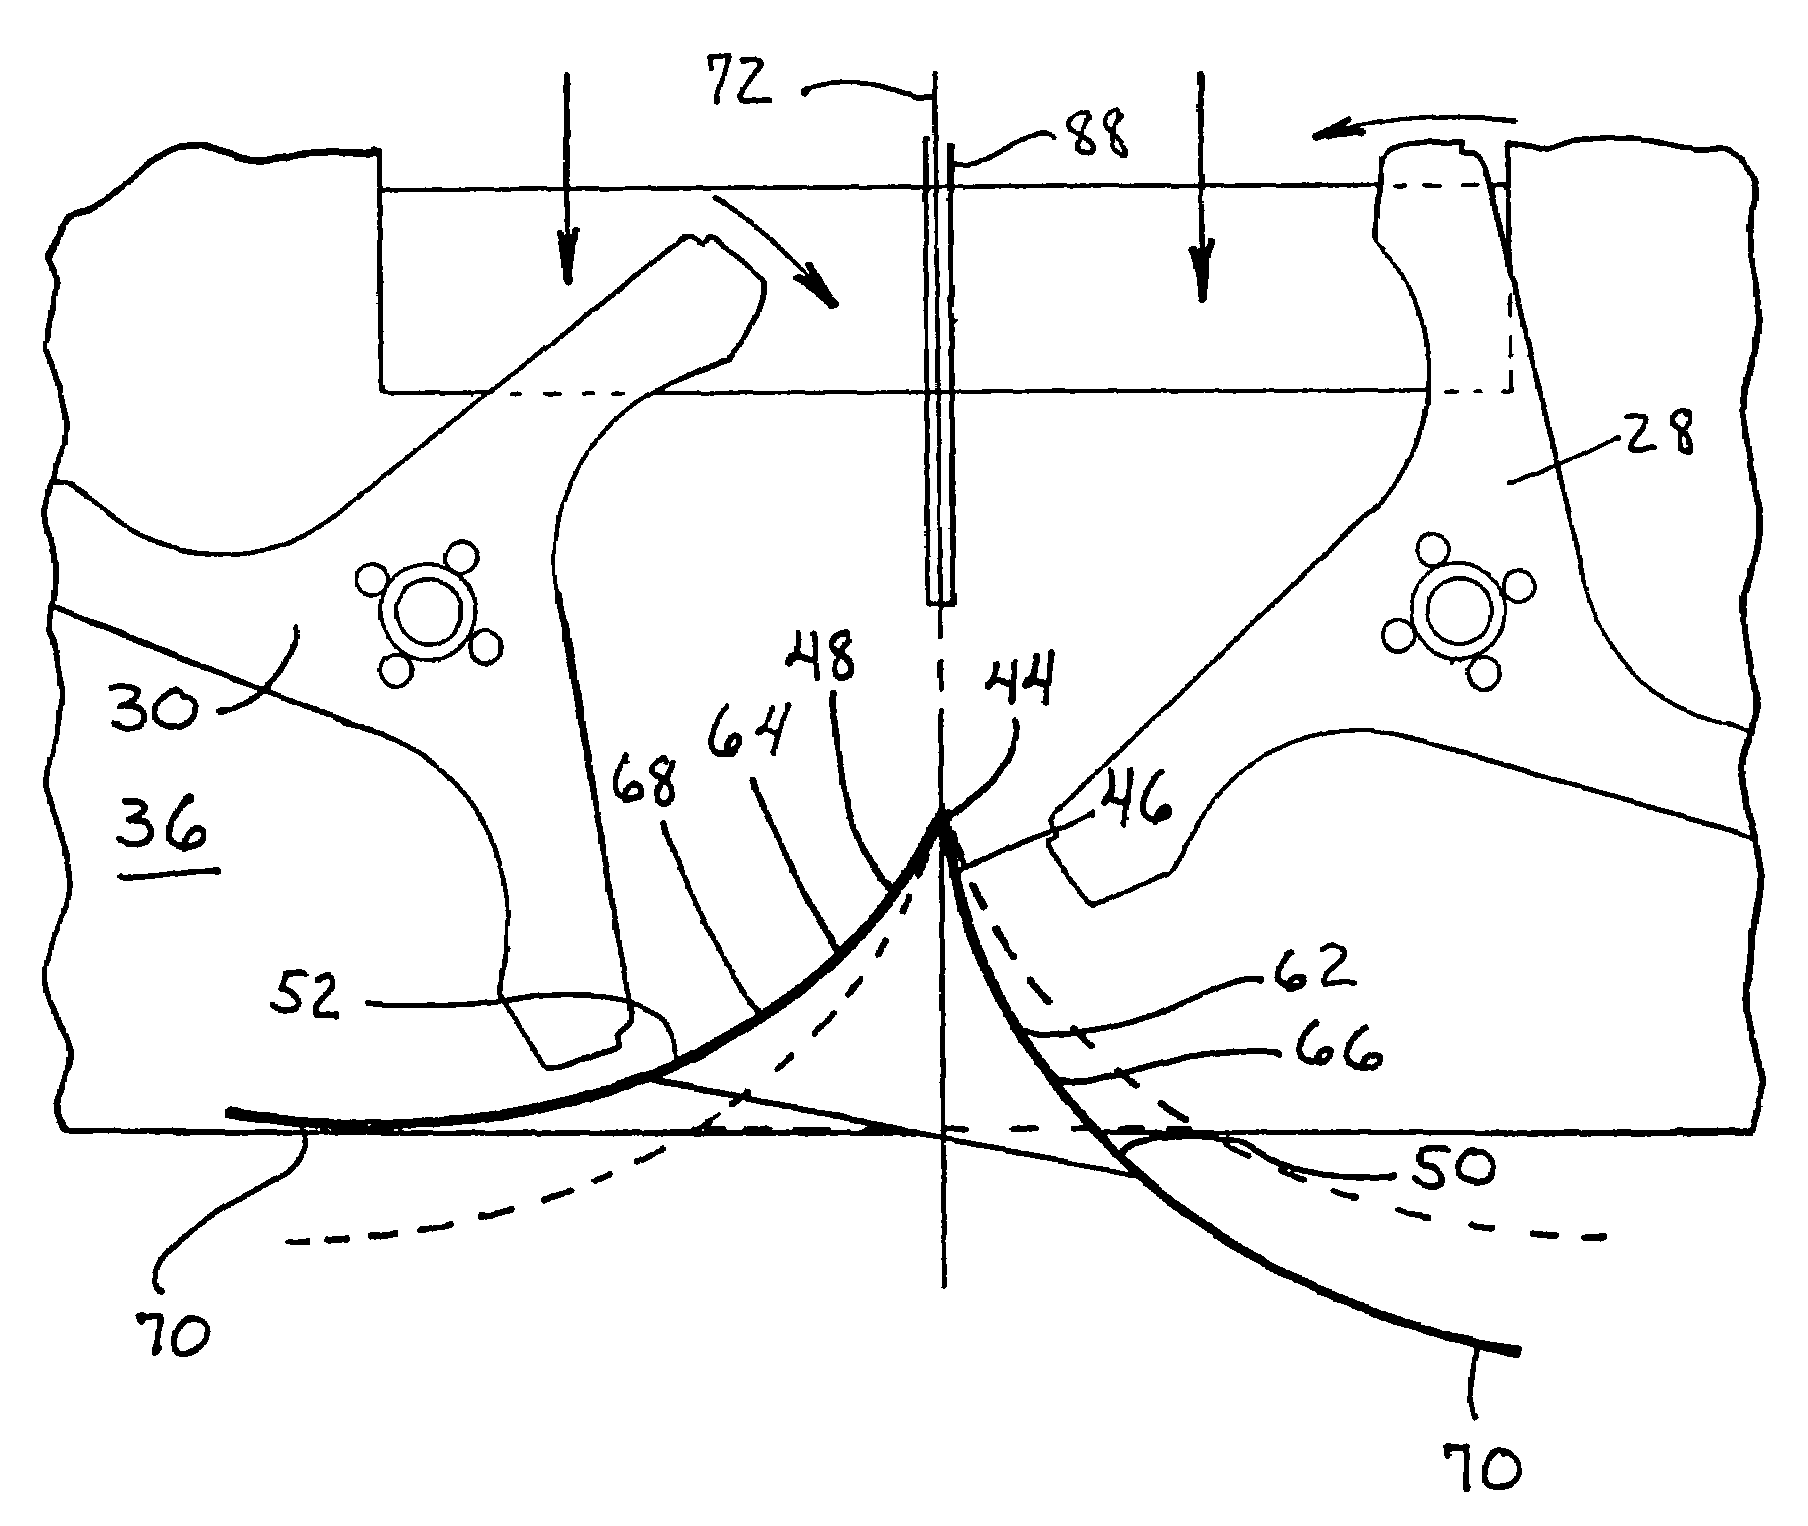 Flow distributor apparatus for controlling spread width of a straw spreader